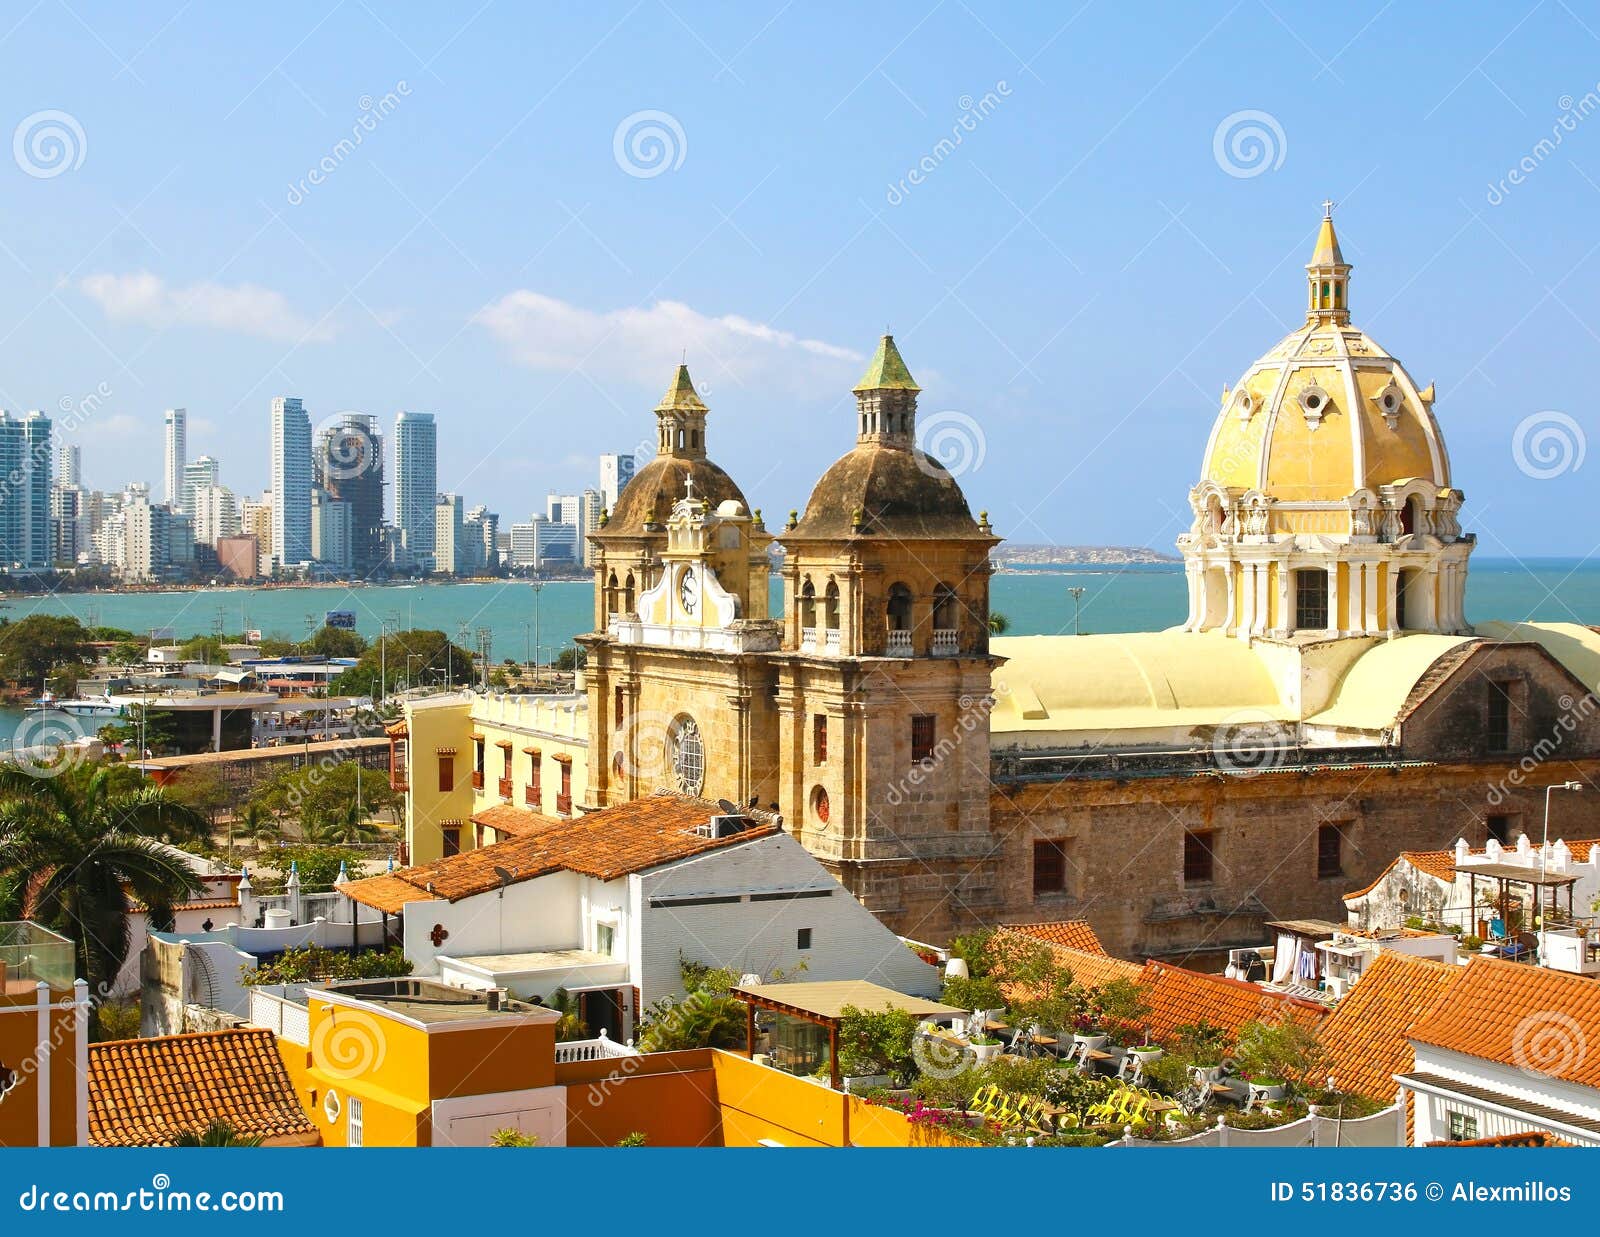 historic center of cartagena, colombia with the caribbean sea